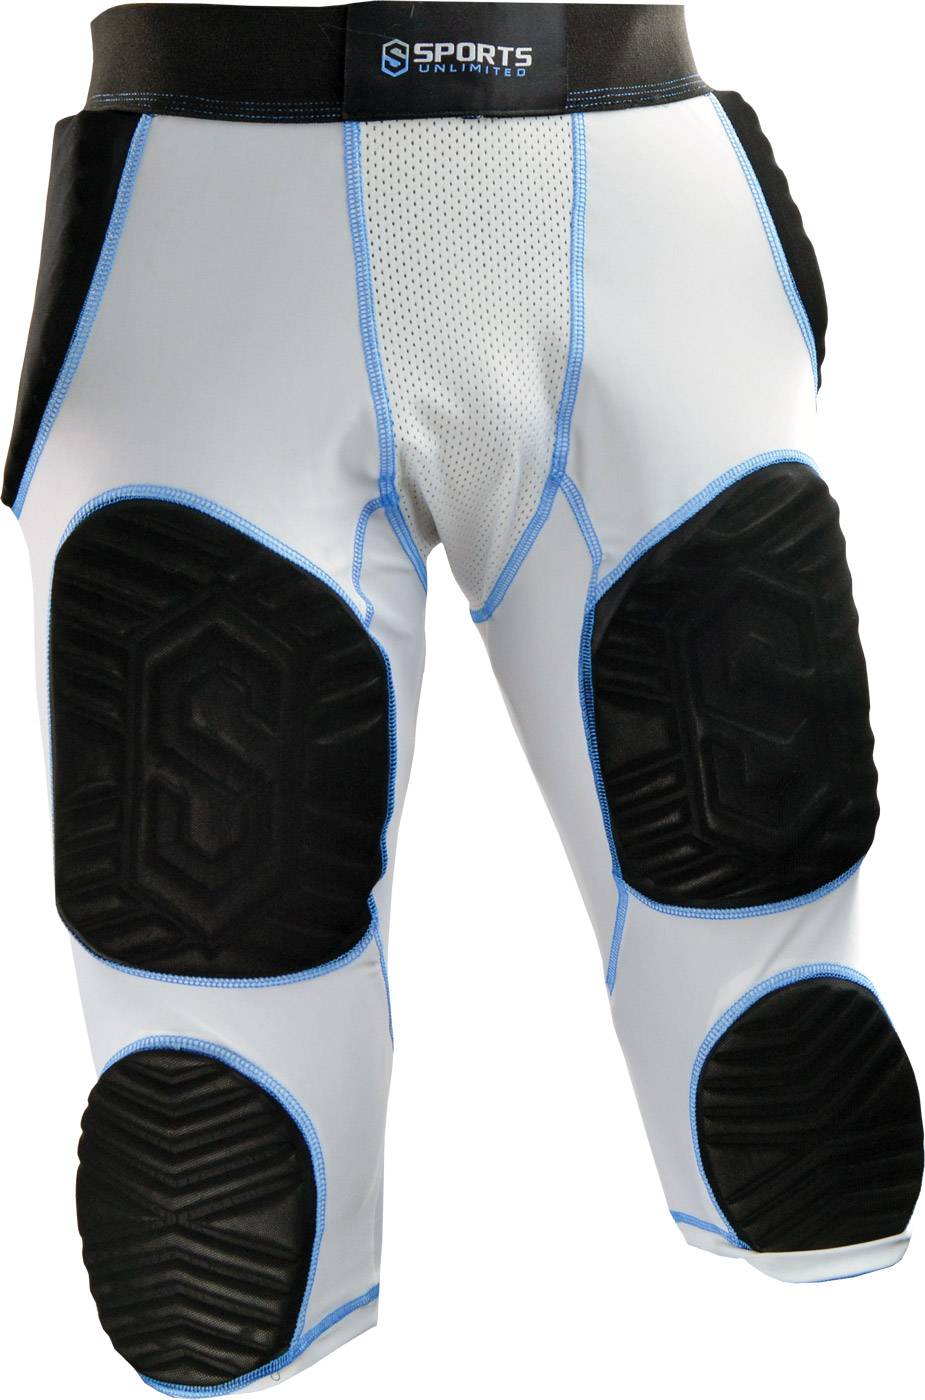 Men's 7-Pad Football Girdle with Cup Pocket (Adult)